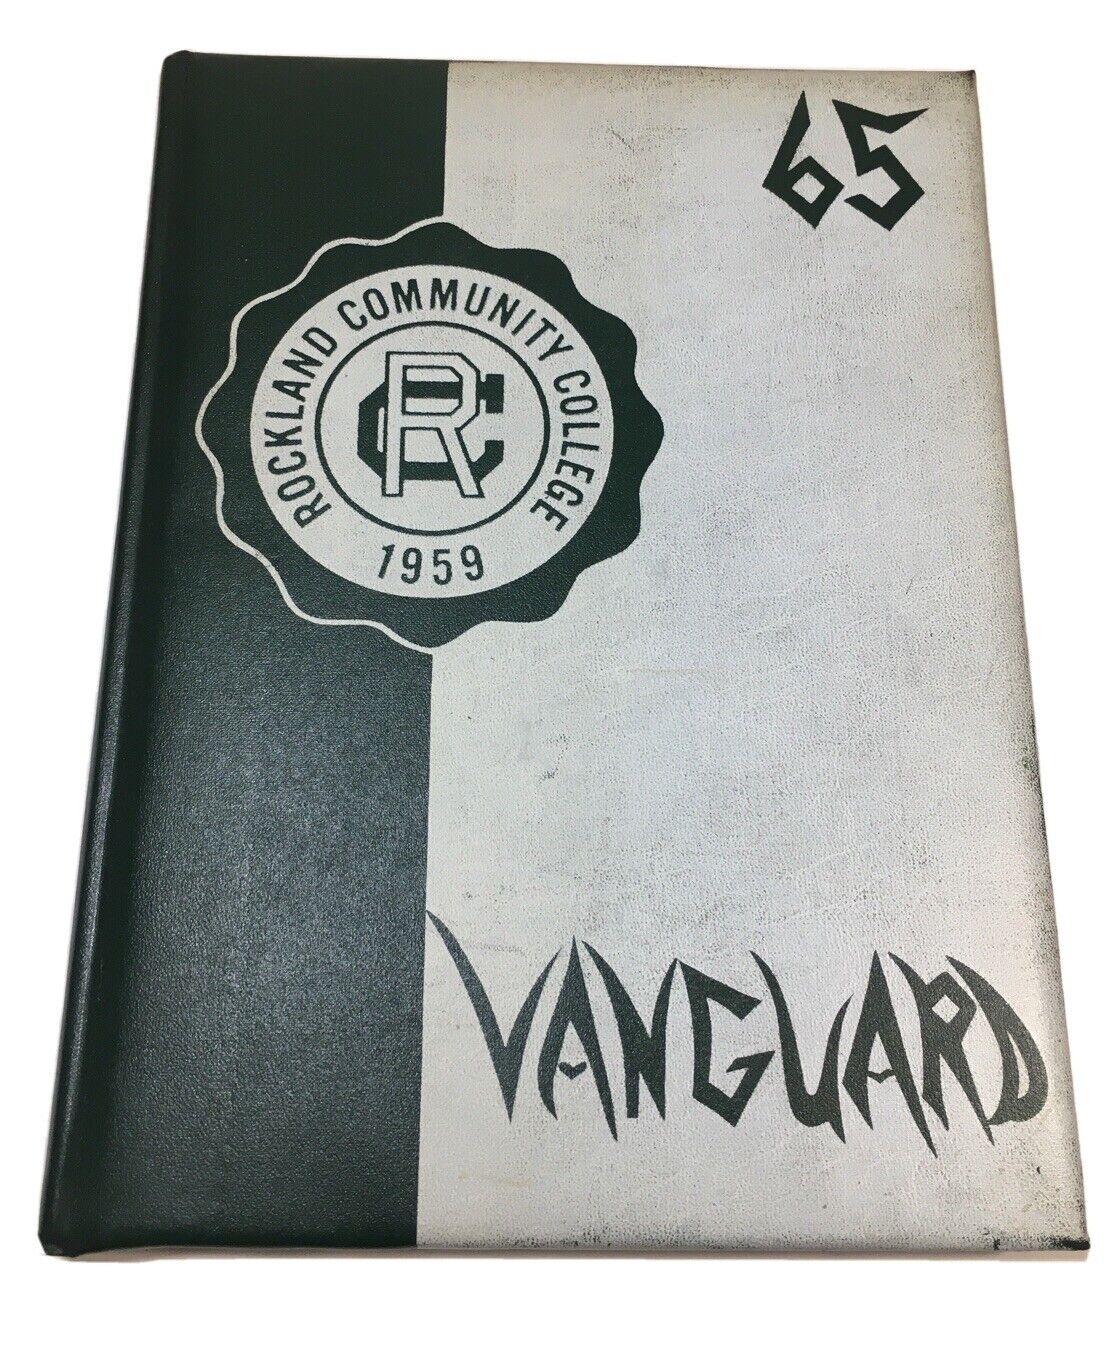 1959 VANGUARD YEARBOOK ROCKLAND COMMUNITY COLLEGE SUFFERN NY.